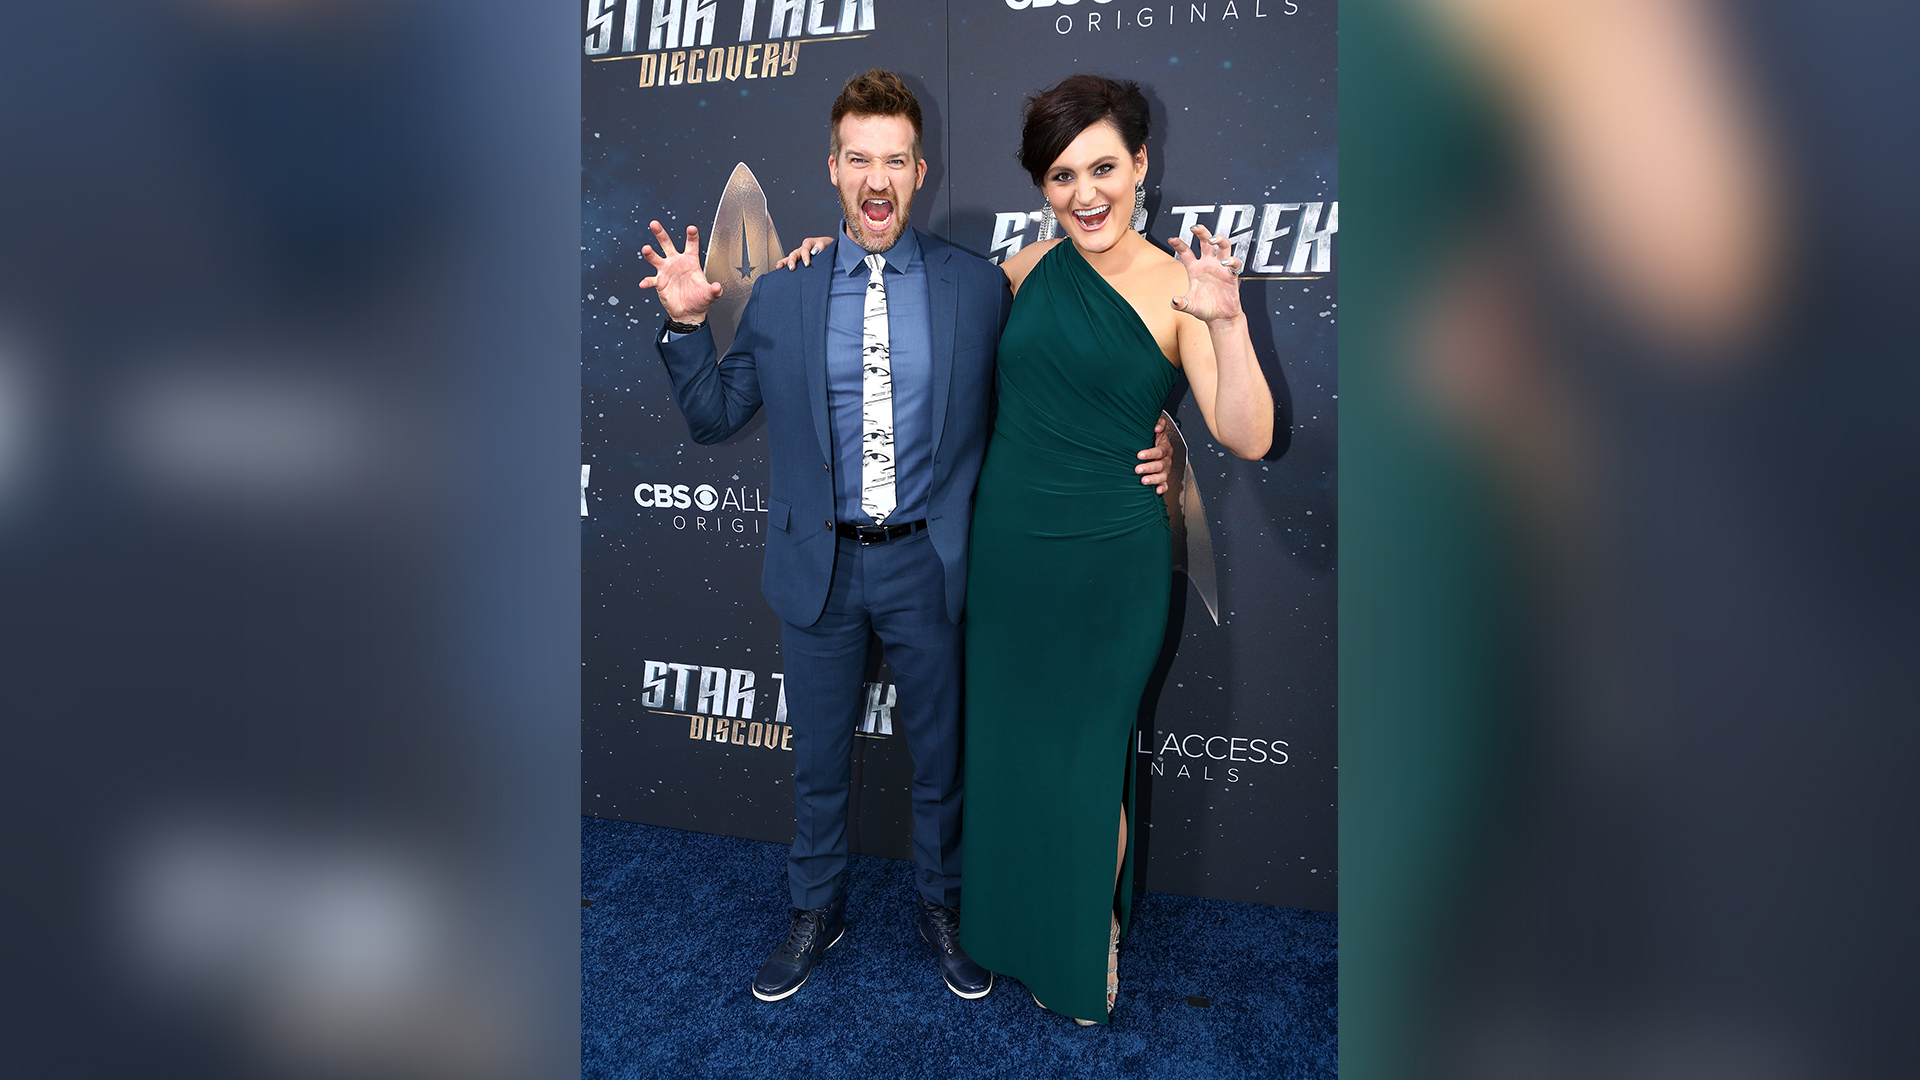 Kenneth Mitchell and Mary Chieffo from Star Trek: Discovery